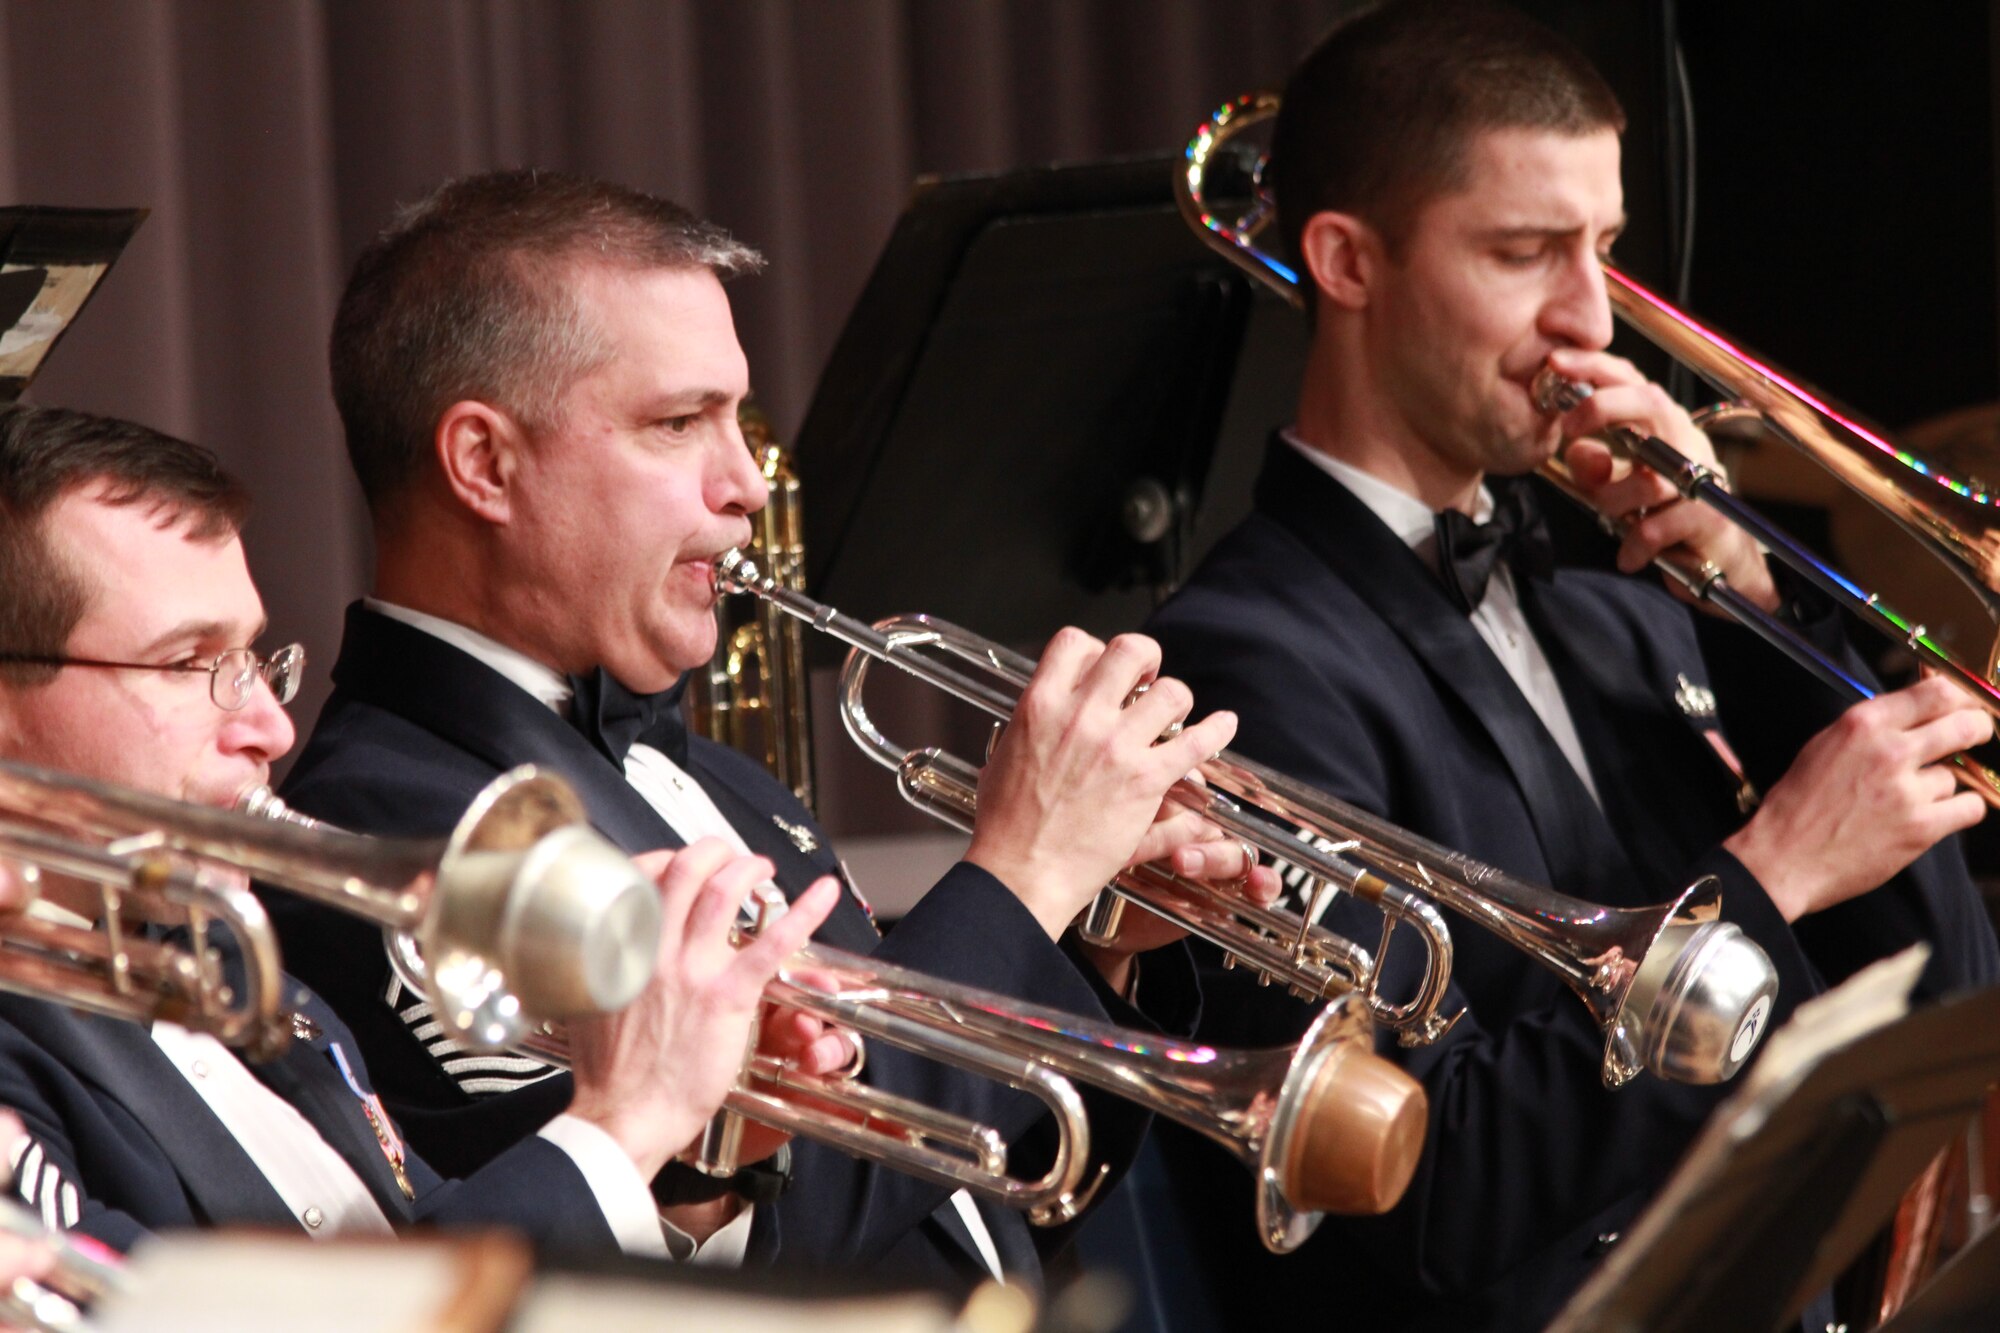 The U.S. Air Force Band of Flight will present their spring concert “Old, New and Forever Blue” featuring Wright Brass and Systems Go, on Saturday, April 6 at 7:30 p.m. at the National Museum of the U.S. Air Force. Tickets are required and will be available beginning Wednesday, March 6 at 9 a.m.  (Courtesy Photo)